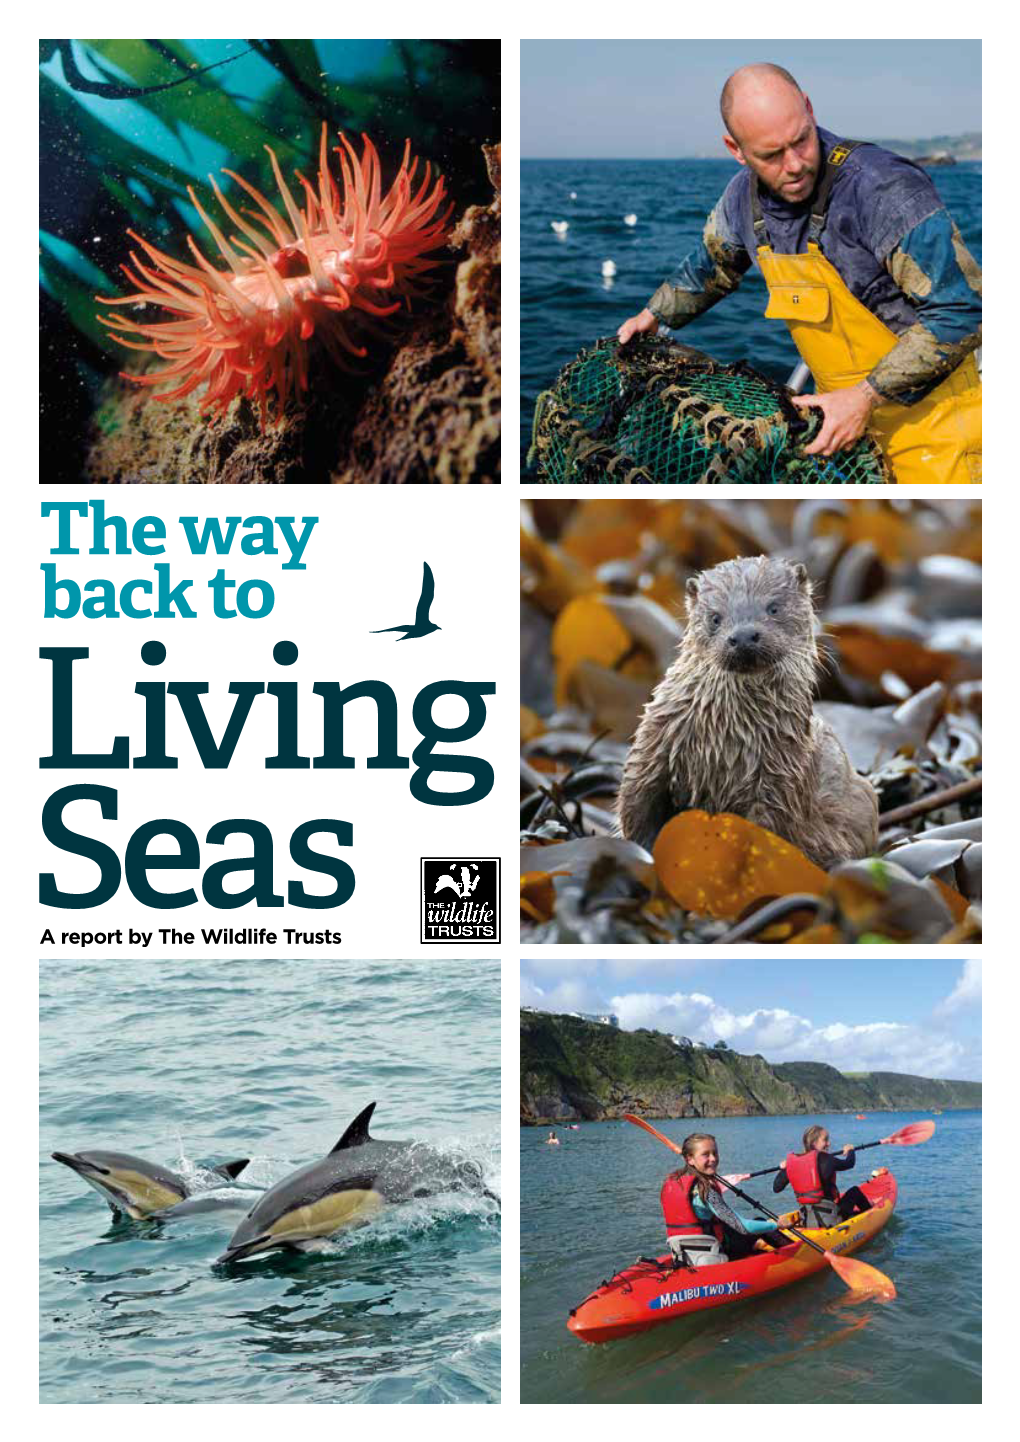 The Way Back to Living Seas